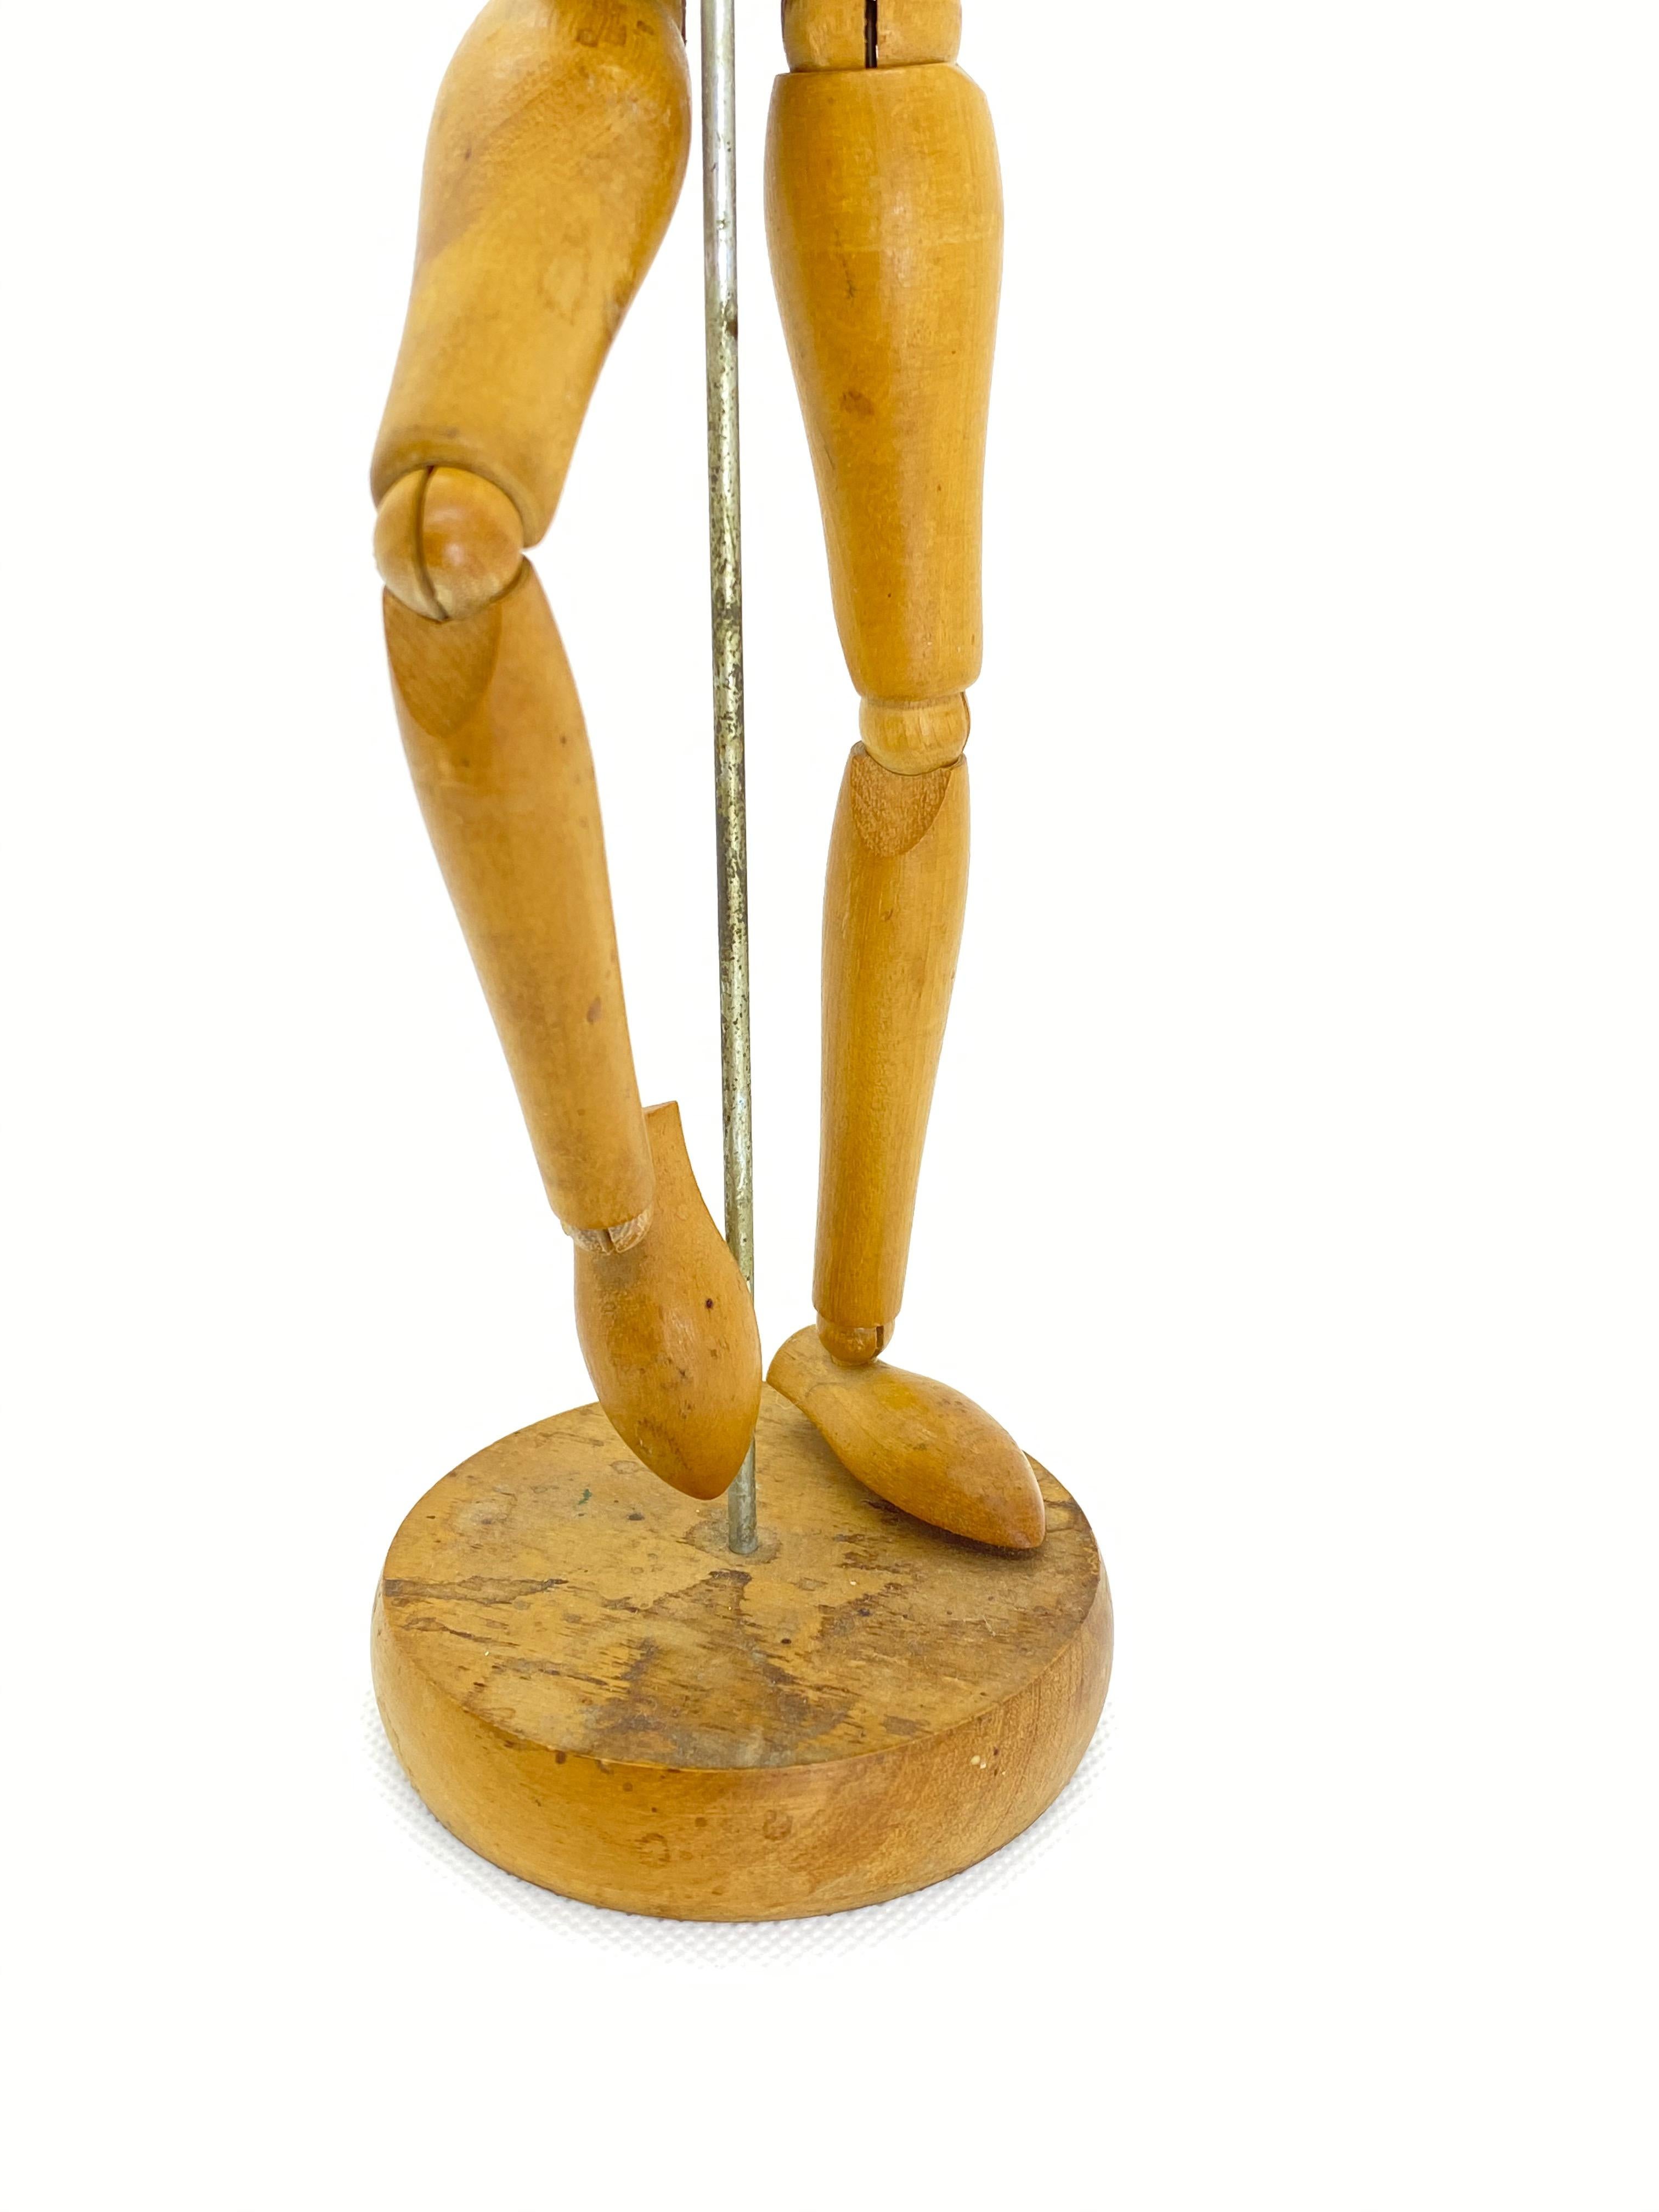 Hand-Crafted Art Deco Style Traditional Wooden Artist Mannequin Model Vintage, 1950s For Sale